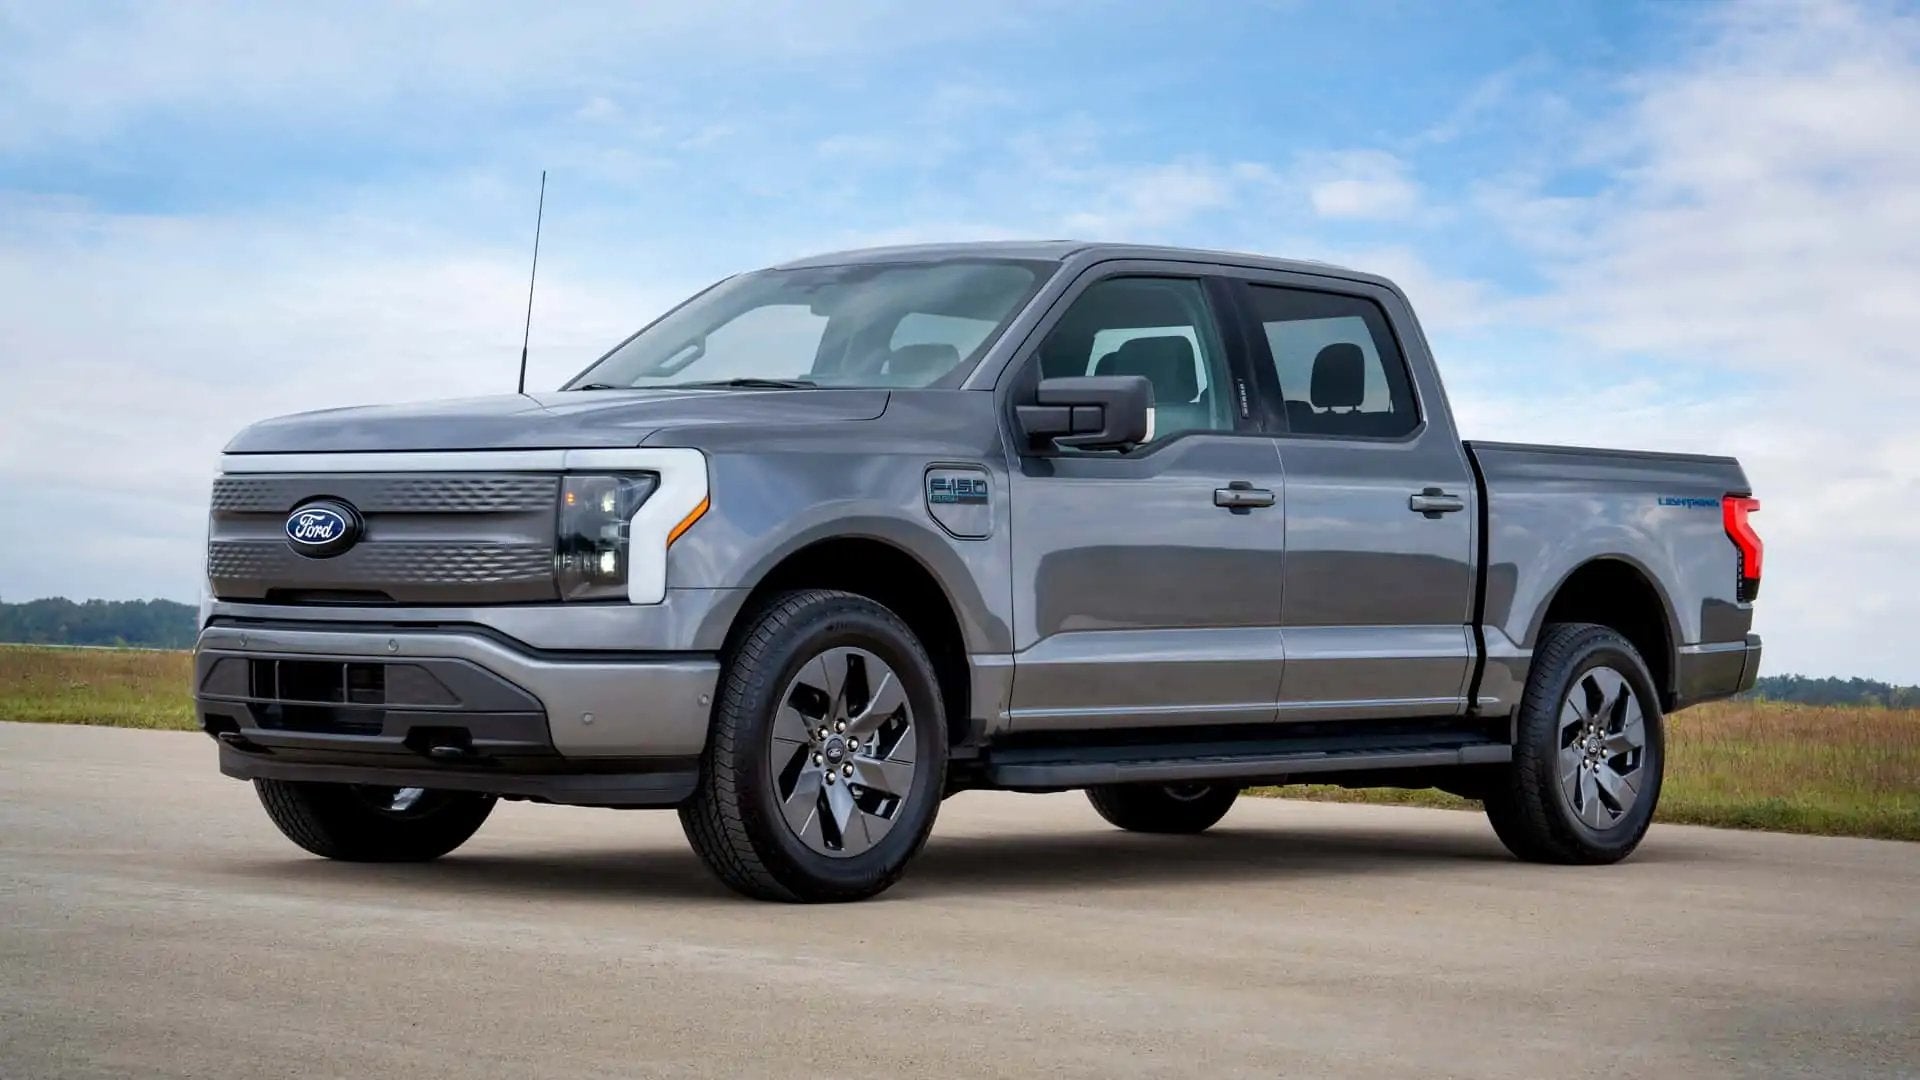 B Pillars Clear Protection Film (PPF) for Ford F-150 Lightning